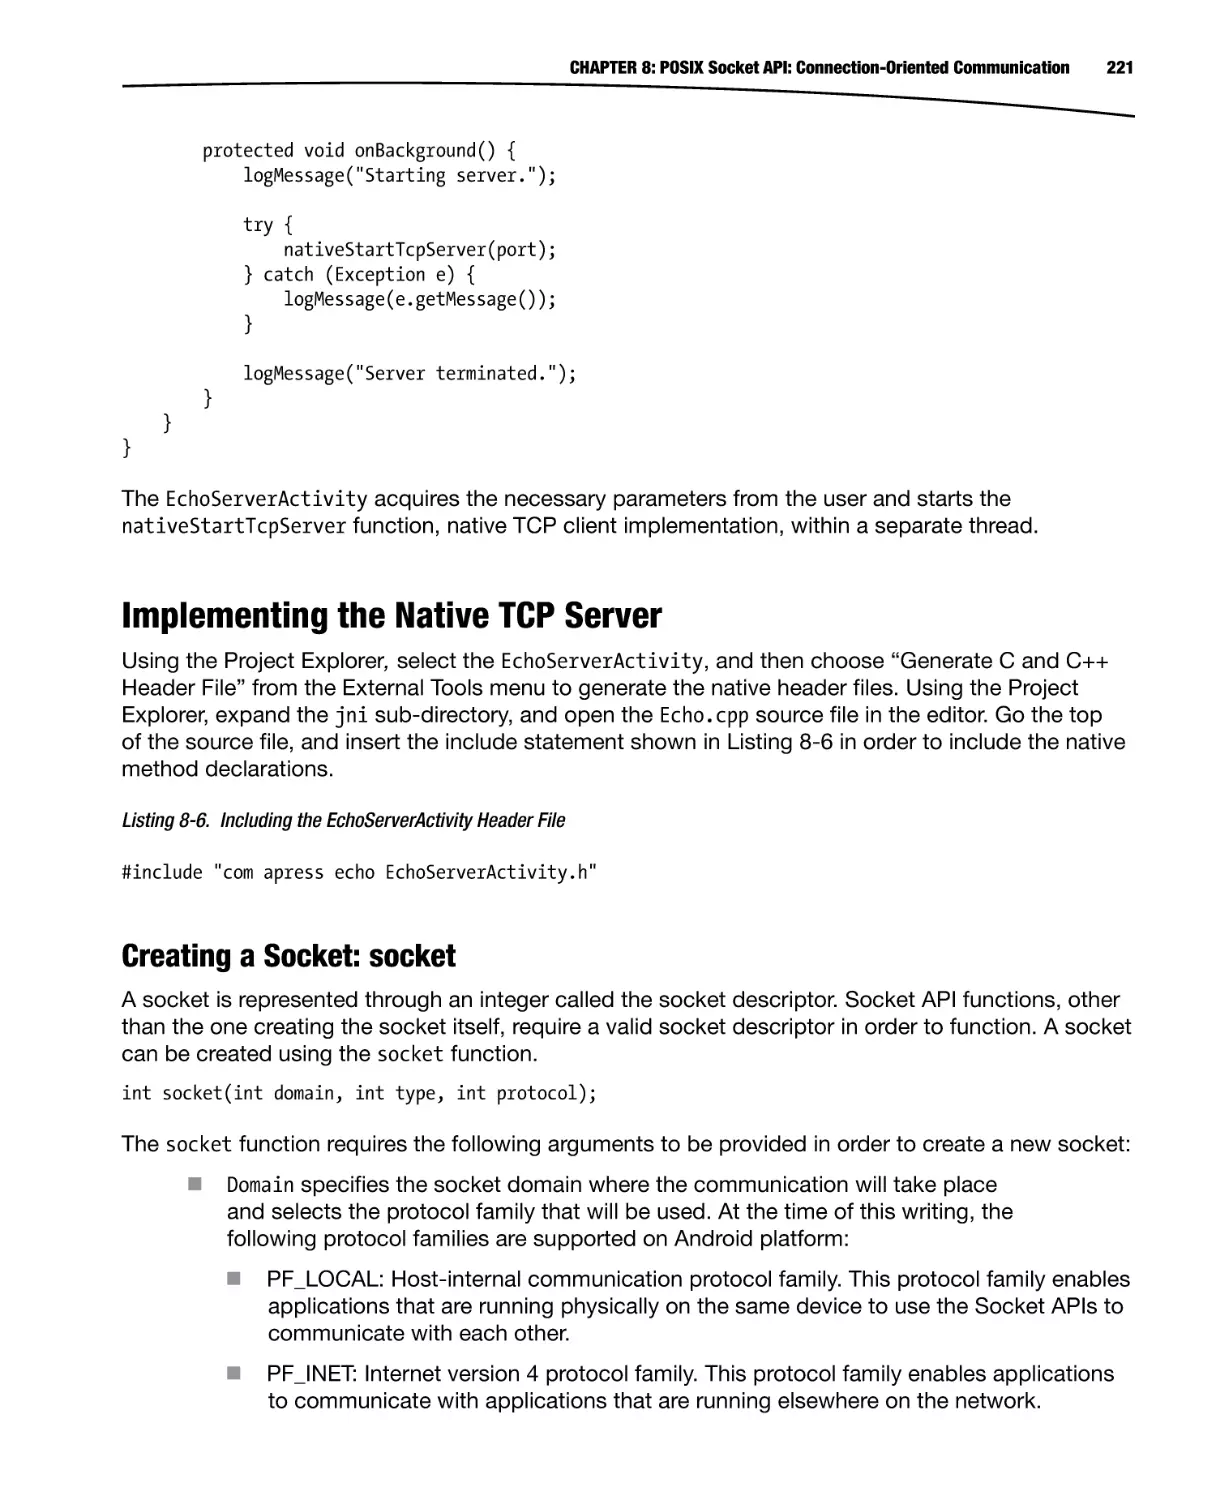 Implementing the Native TCP Server
Creating a Socket